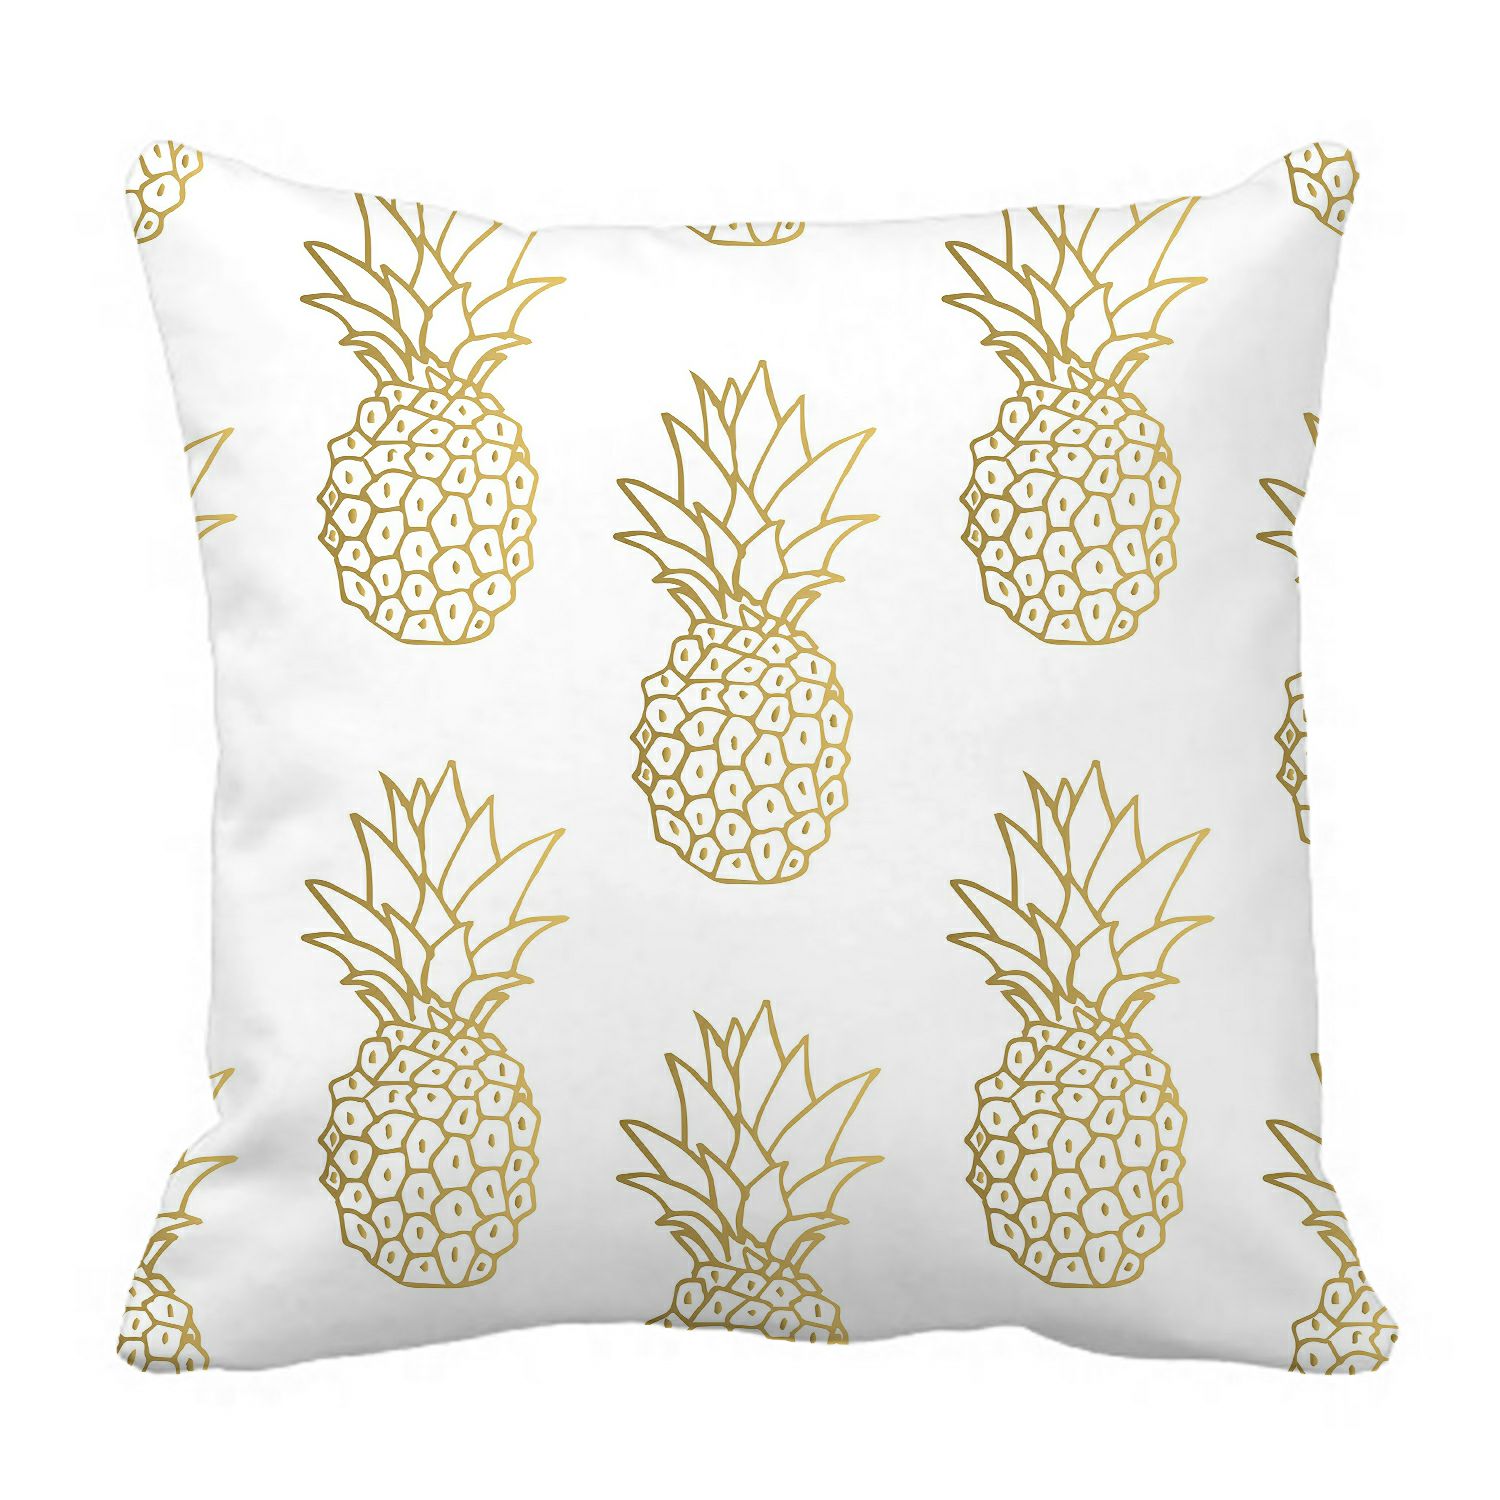 ABPHQTO Pattern Gold Pineapple Pillow Case Pillow Cover ...